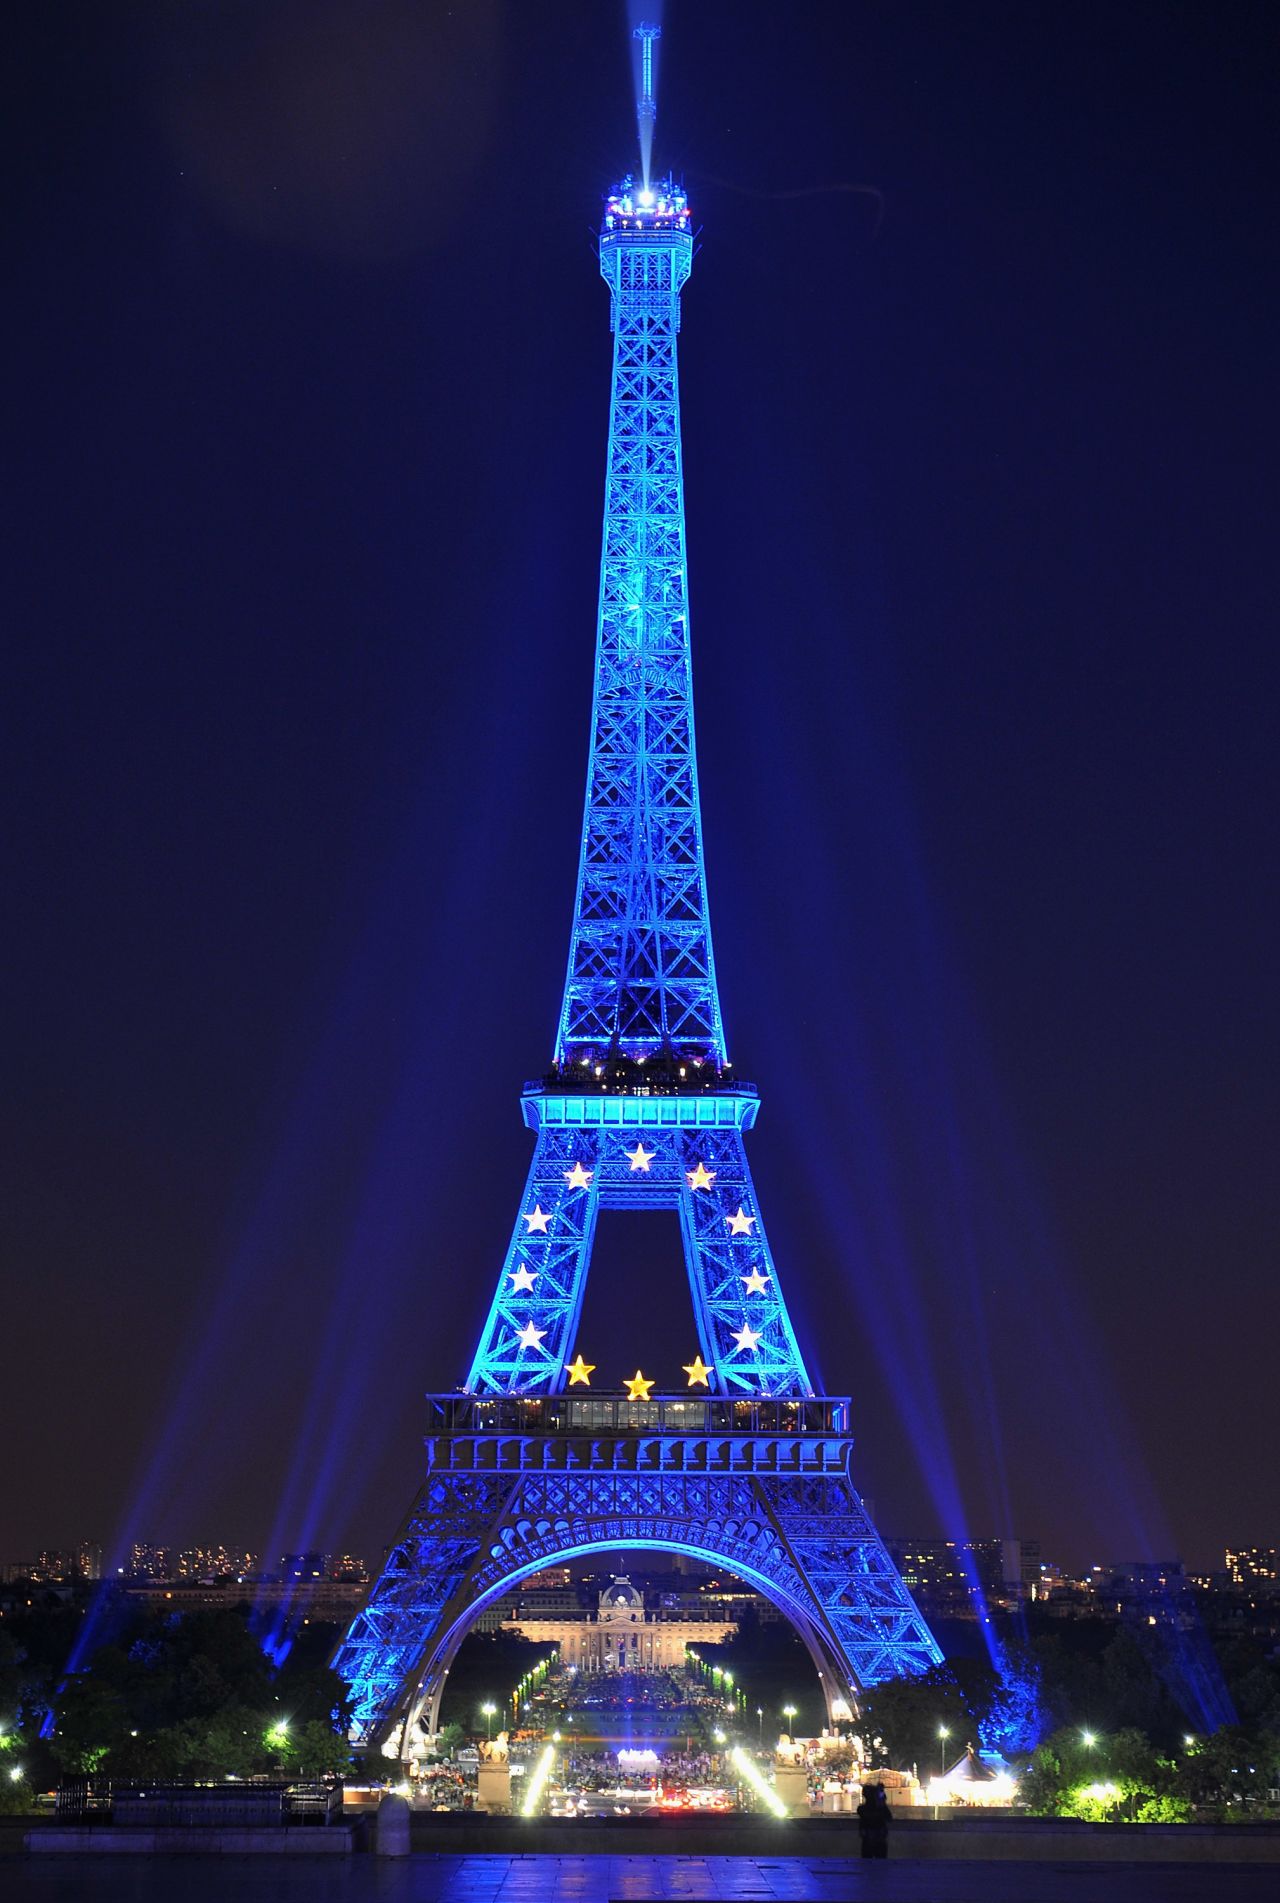 In 2008, the Eiffel Tower was illuminated in blue with gold stars, representing the EU flag, to mark the staunchly pro-European nation's EU presidency.